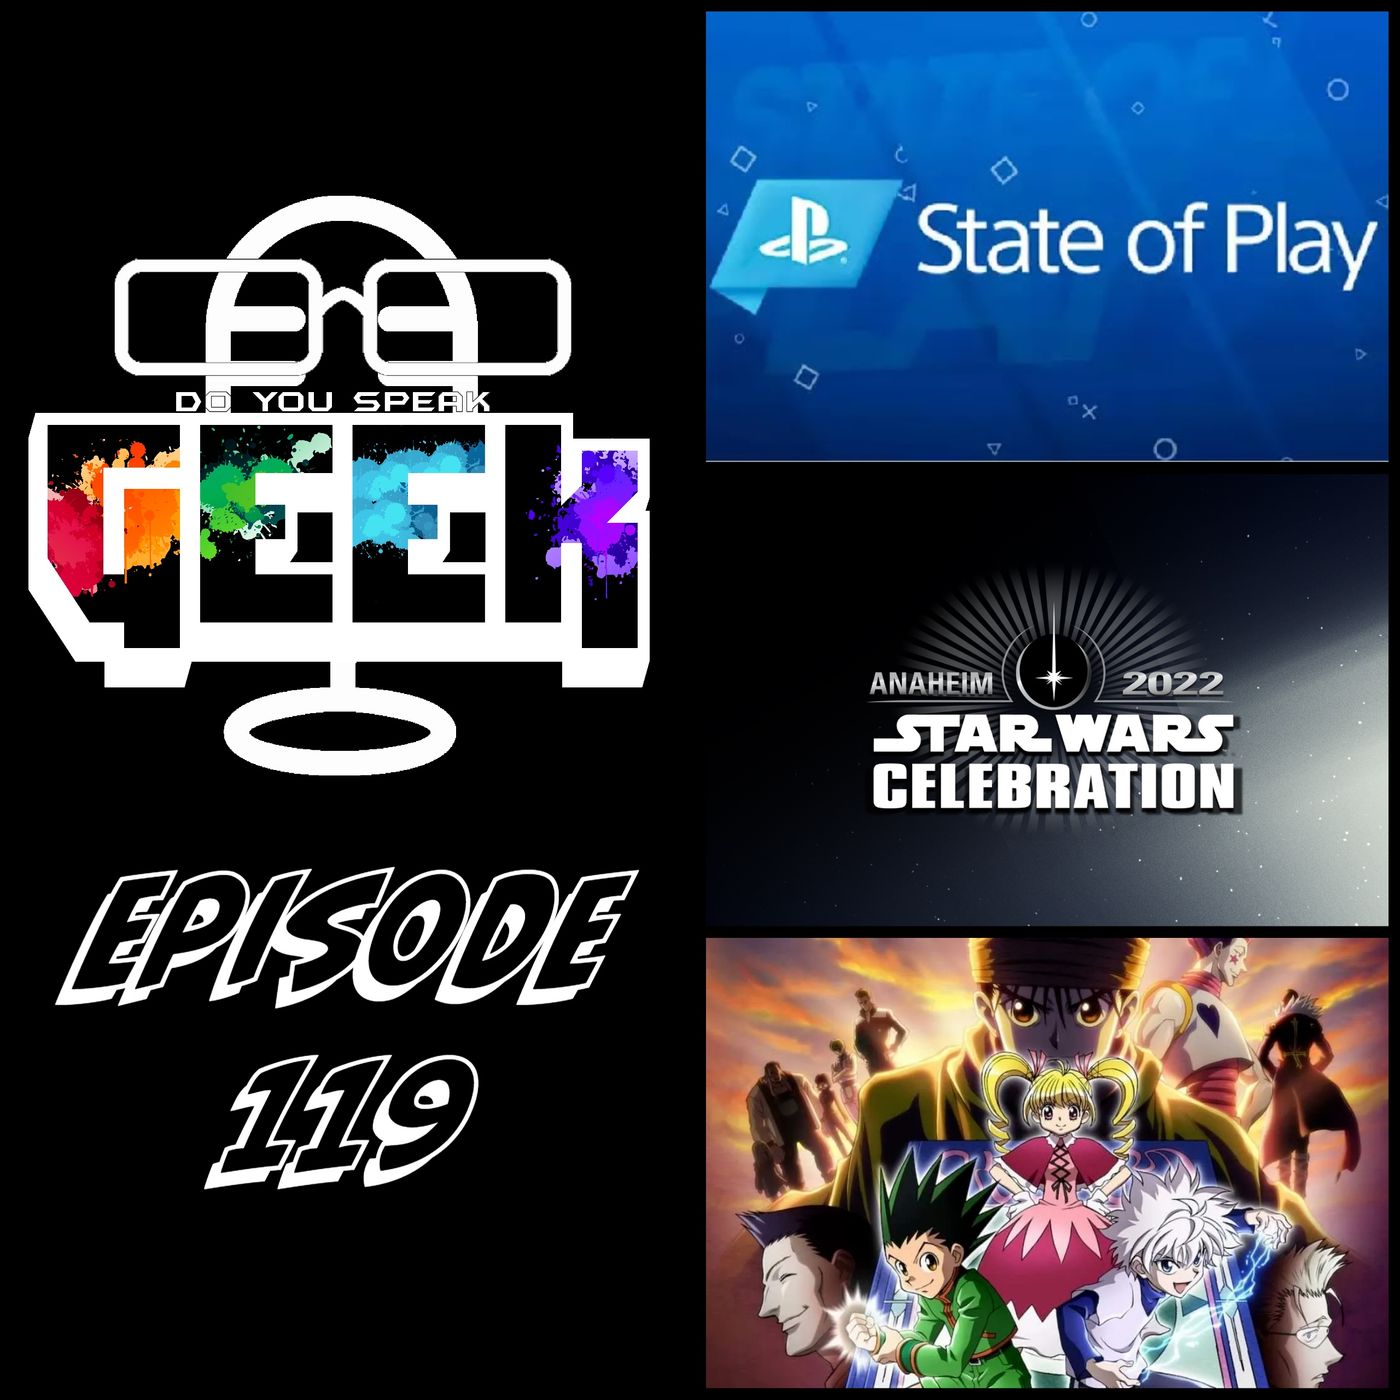 Episode 119 (Star Wars Celebration, Hunter X Hunter, State Of Play, and more) #DoYouSpeakGeek #DYSG